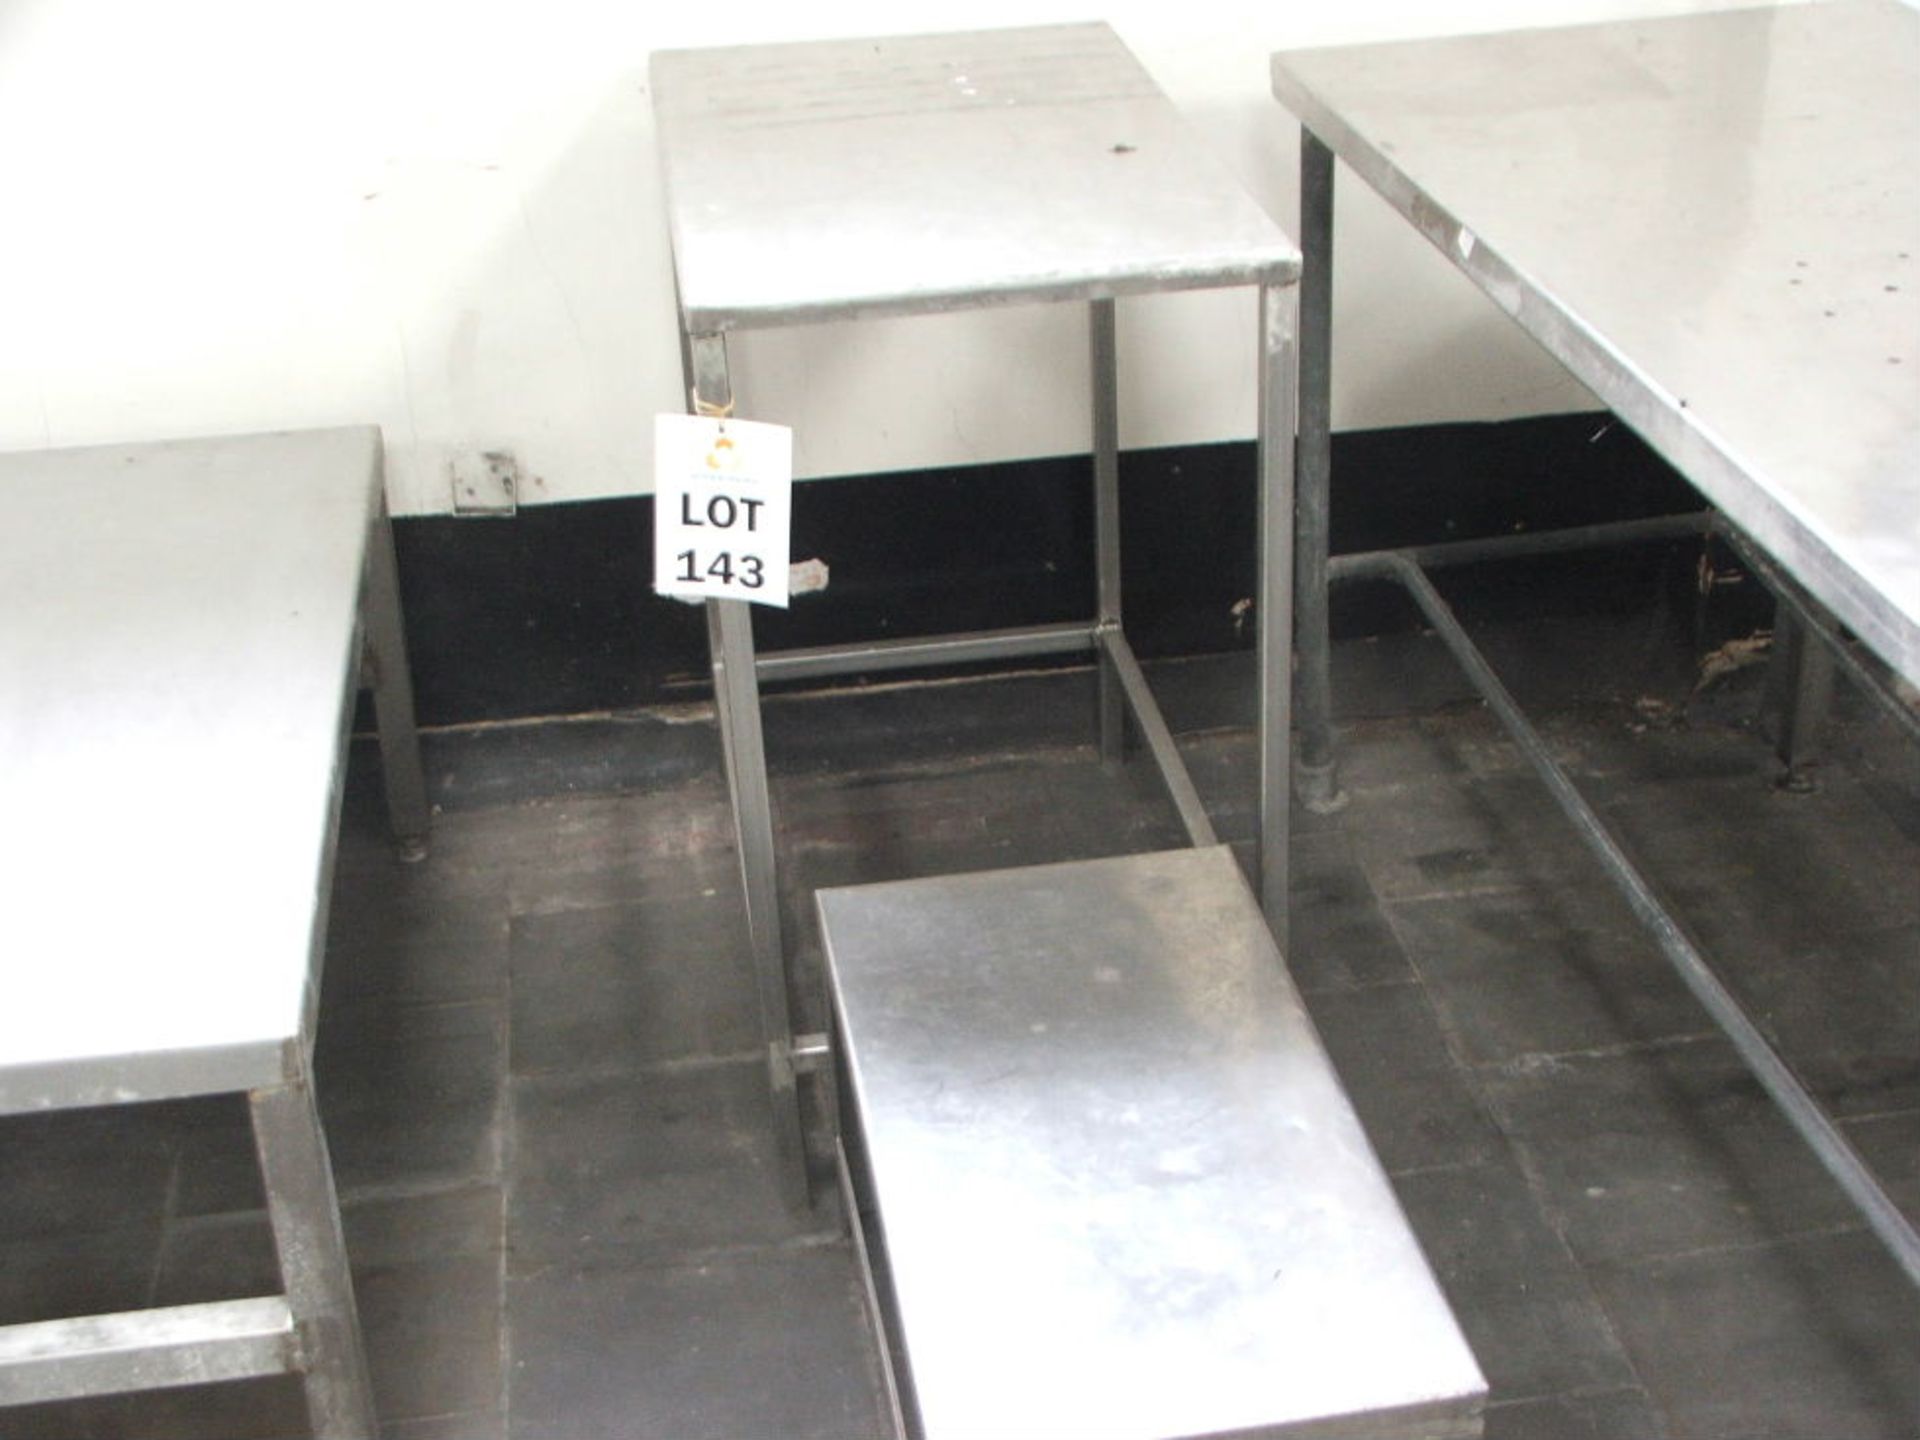 2 X 700 X 400 & 700 X 300 S/STEEL PREPARATION TABLES - Image 2 of 2